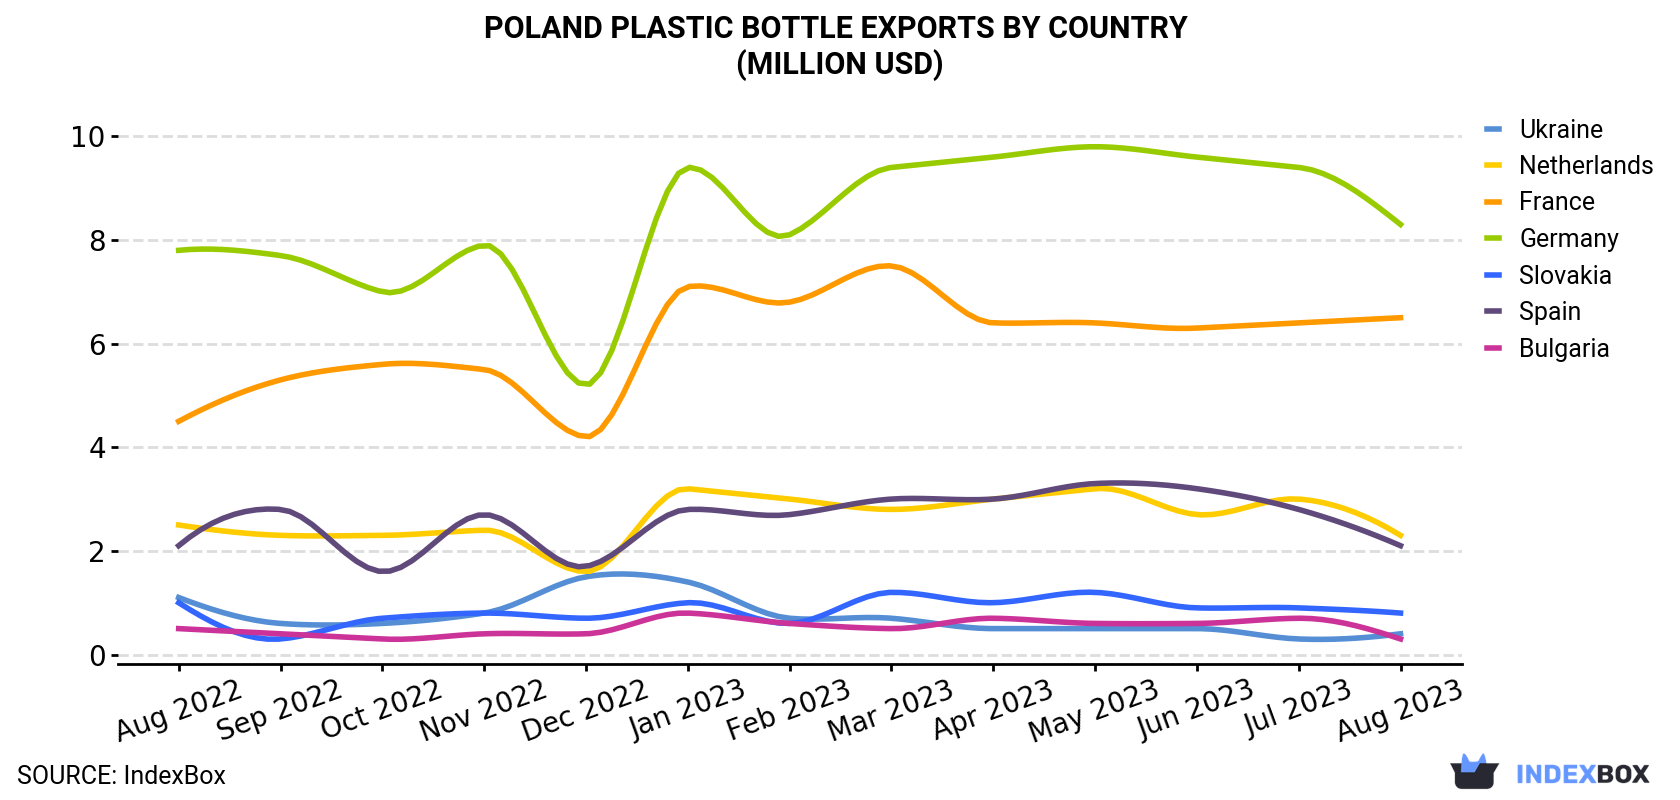 Poland Plastic Bottle Exports By Country (Million USD)